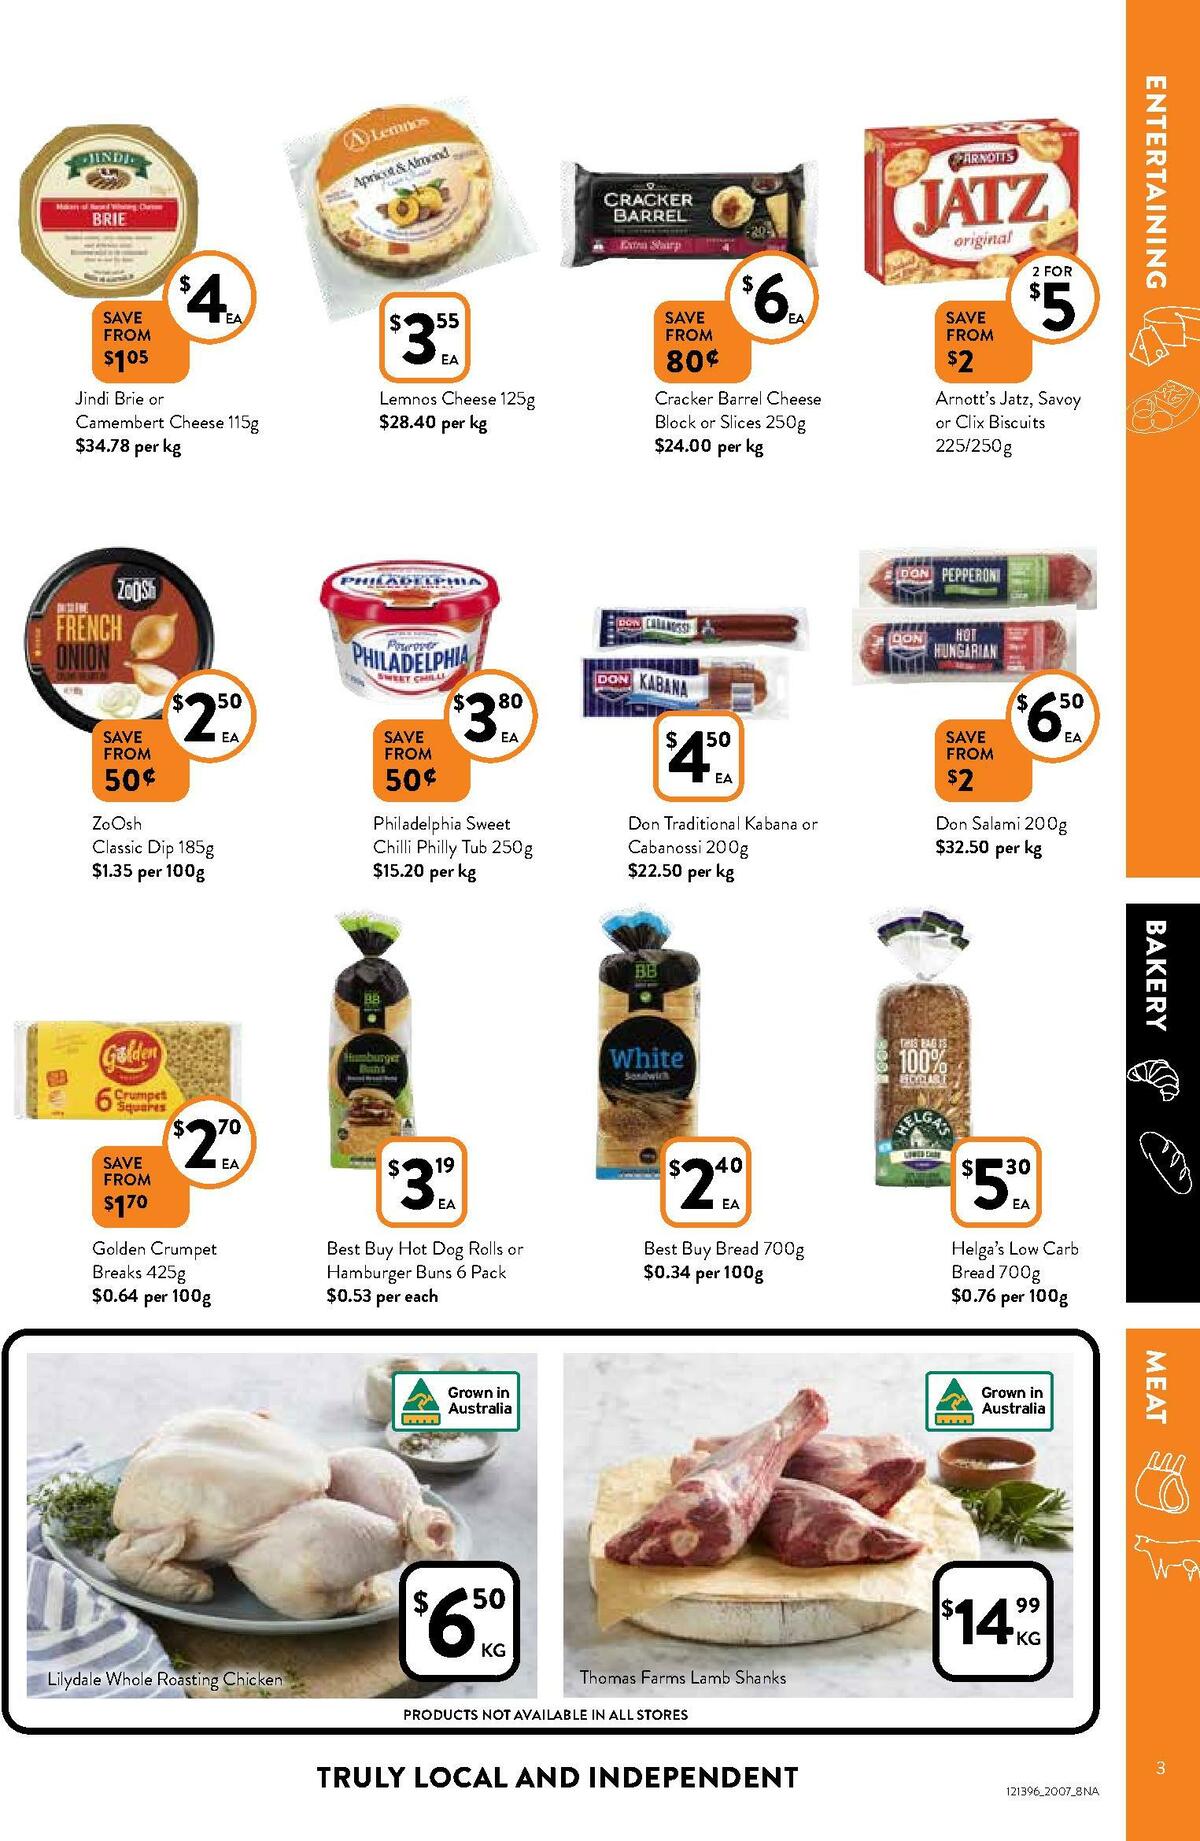 FoodWorks Catalogues from 20 July